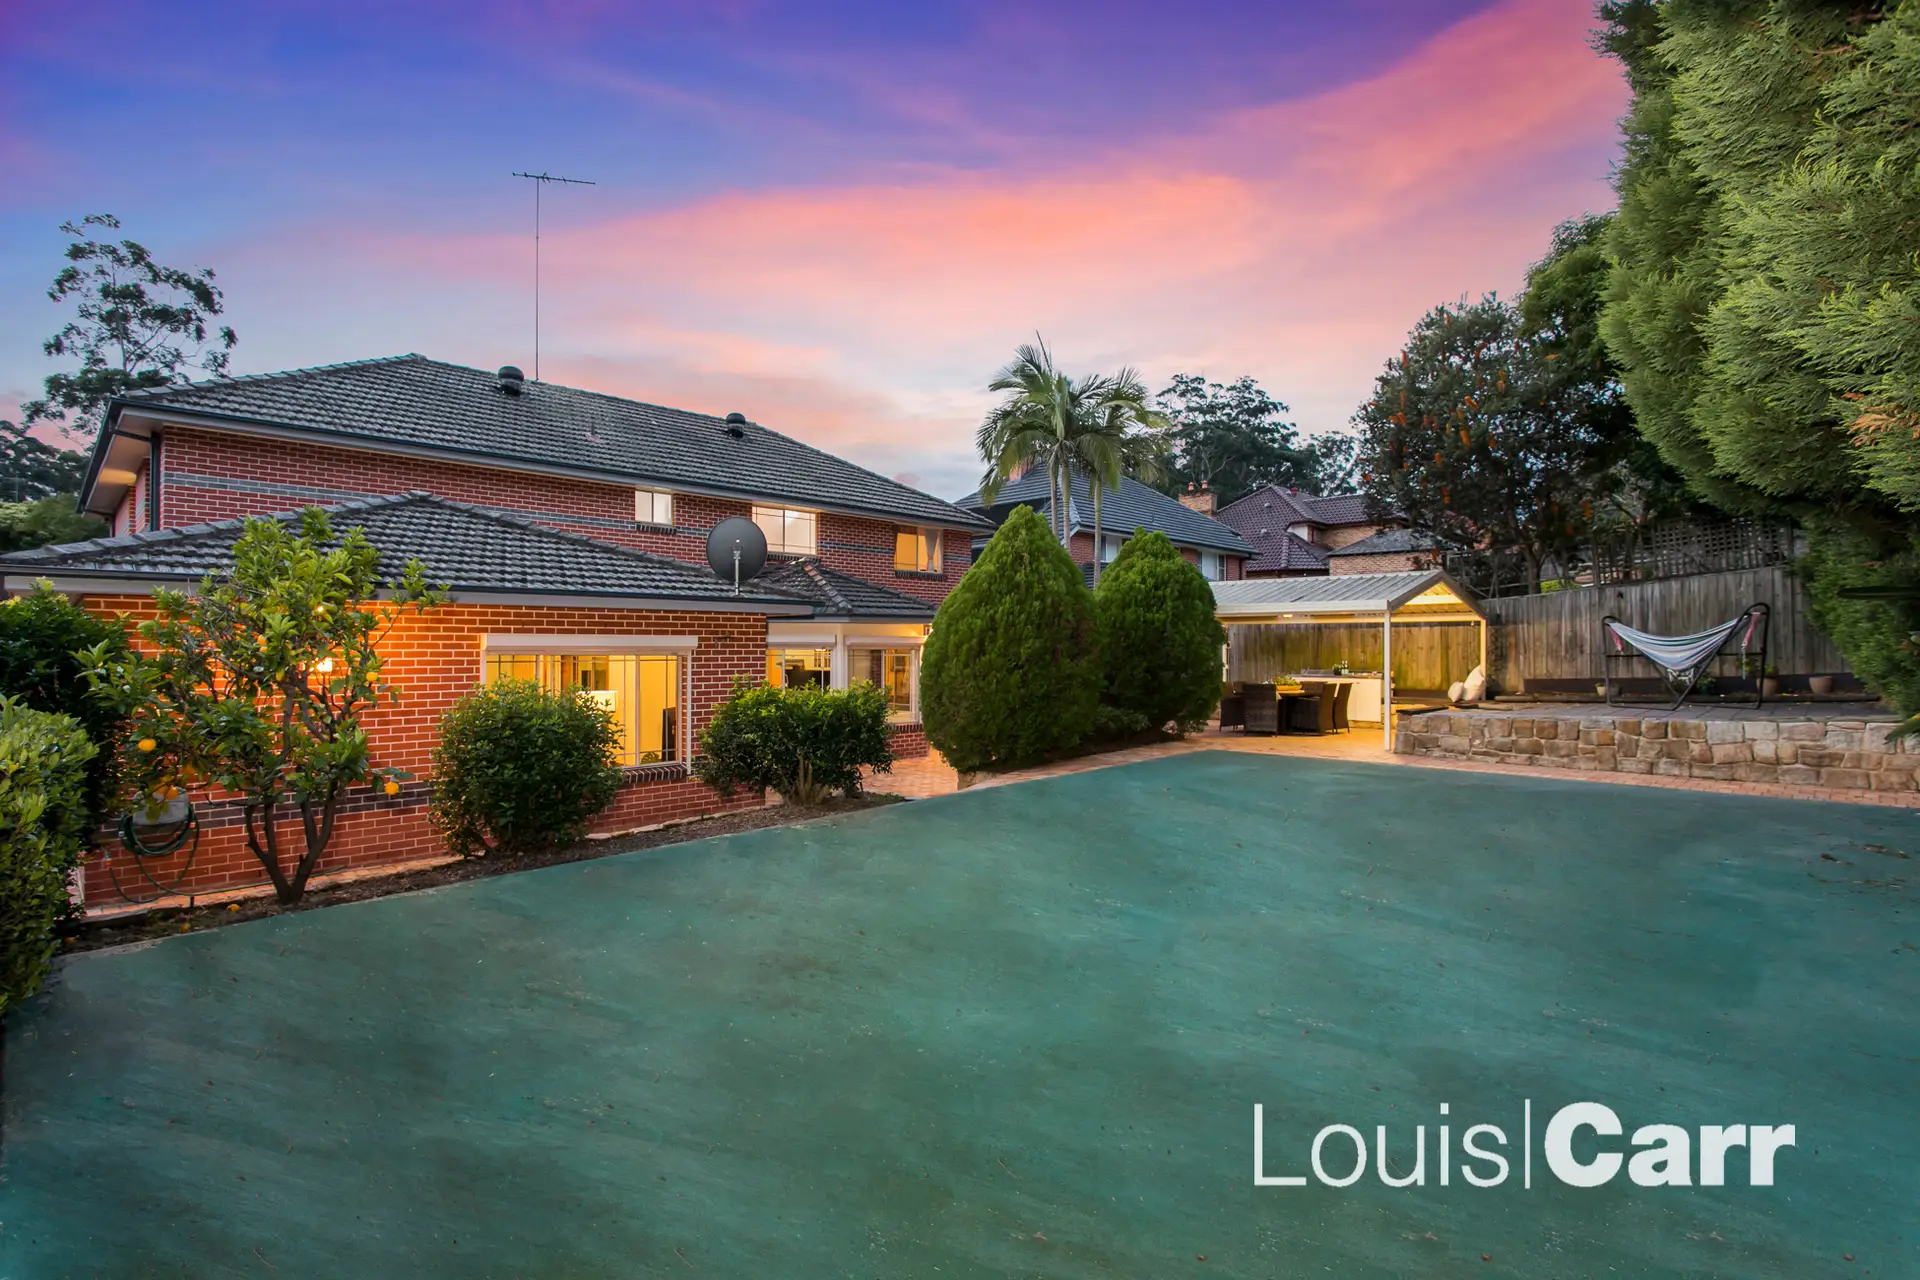 Photo #11: 5 Avonleigh Way, West Pennant Hills - Sold by Louis Carr Real Estate